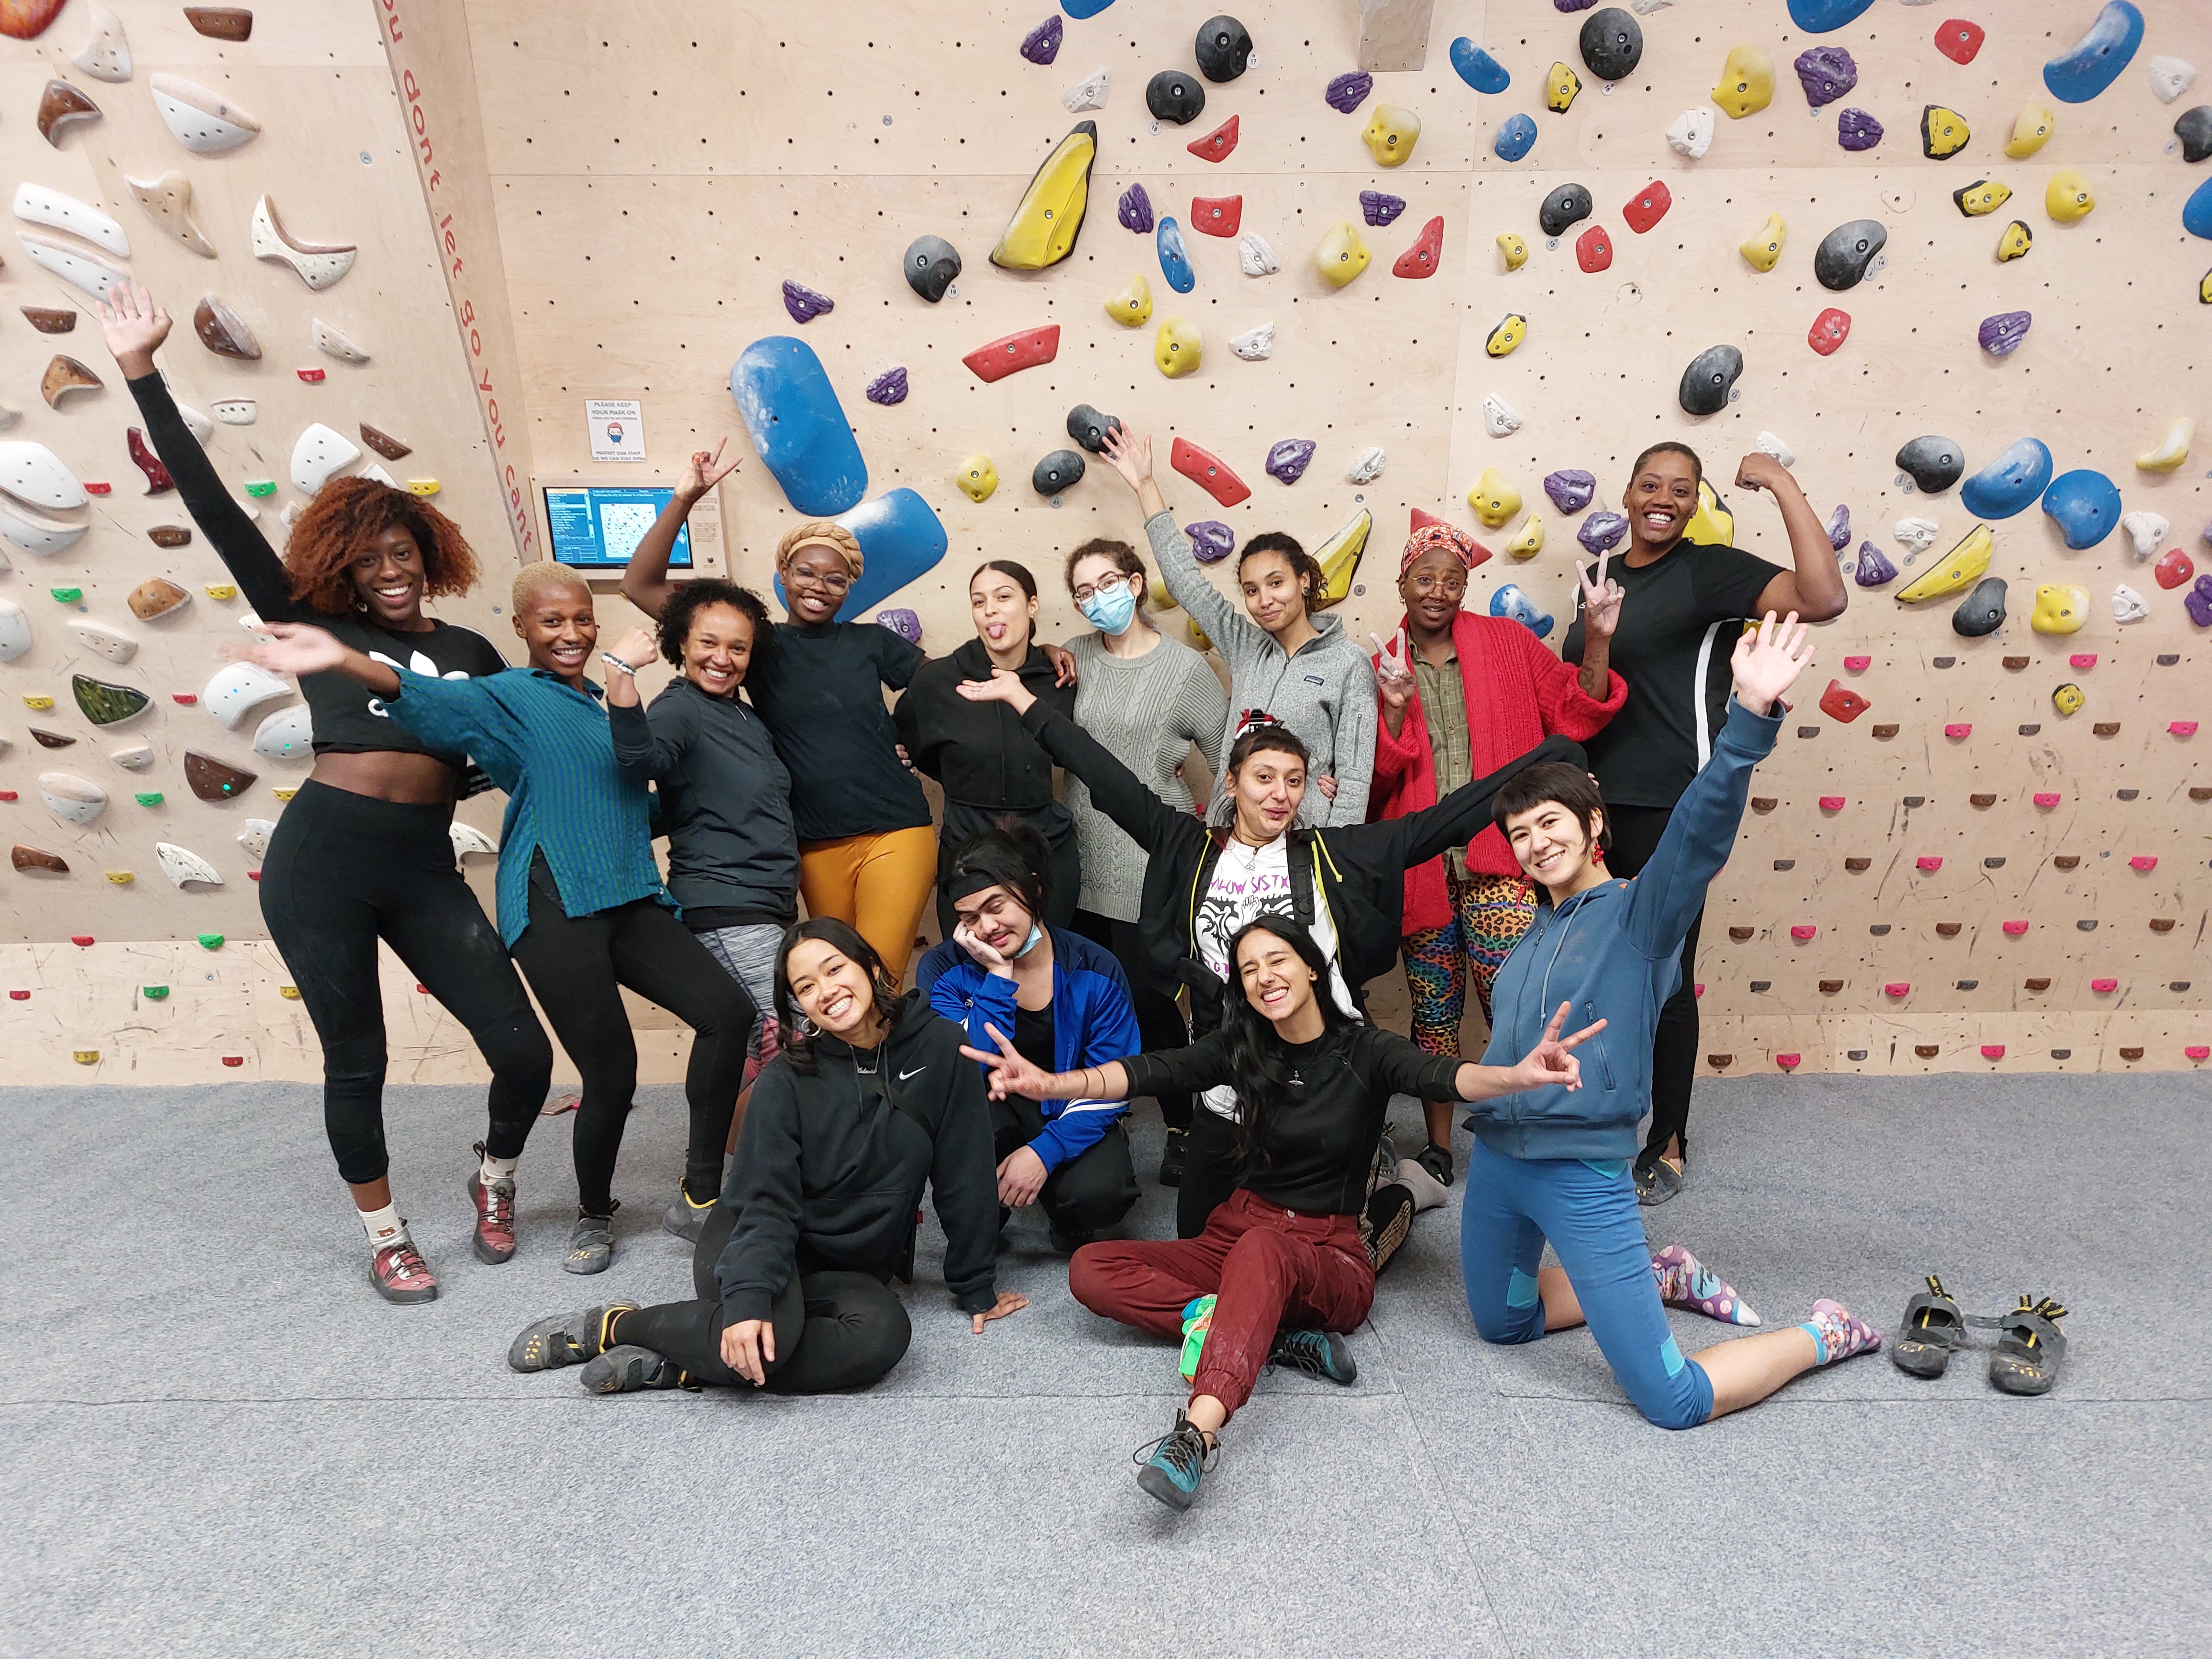 wanderers of colour at a climbing wall